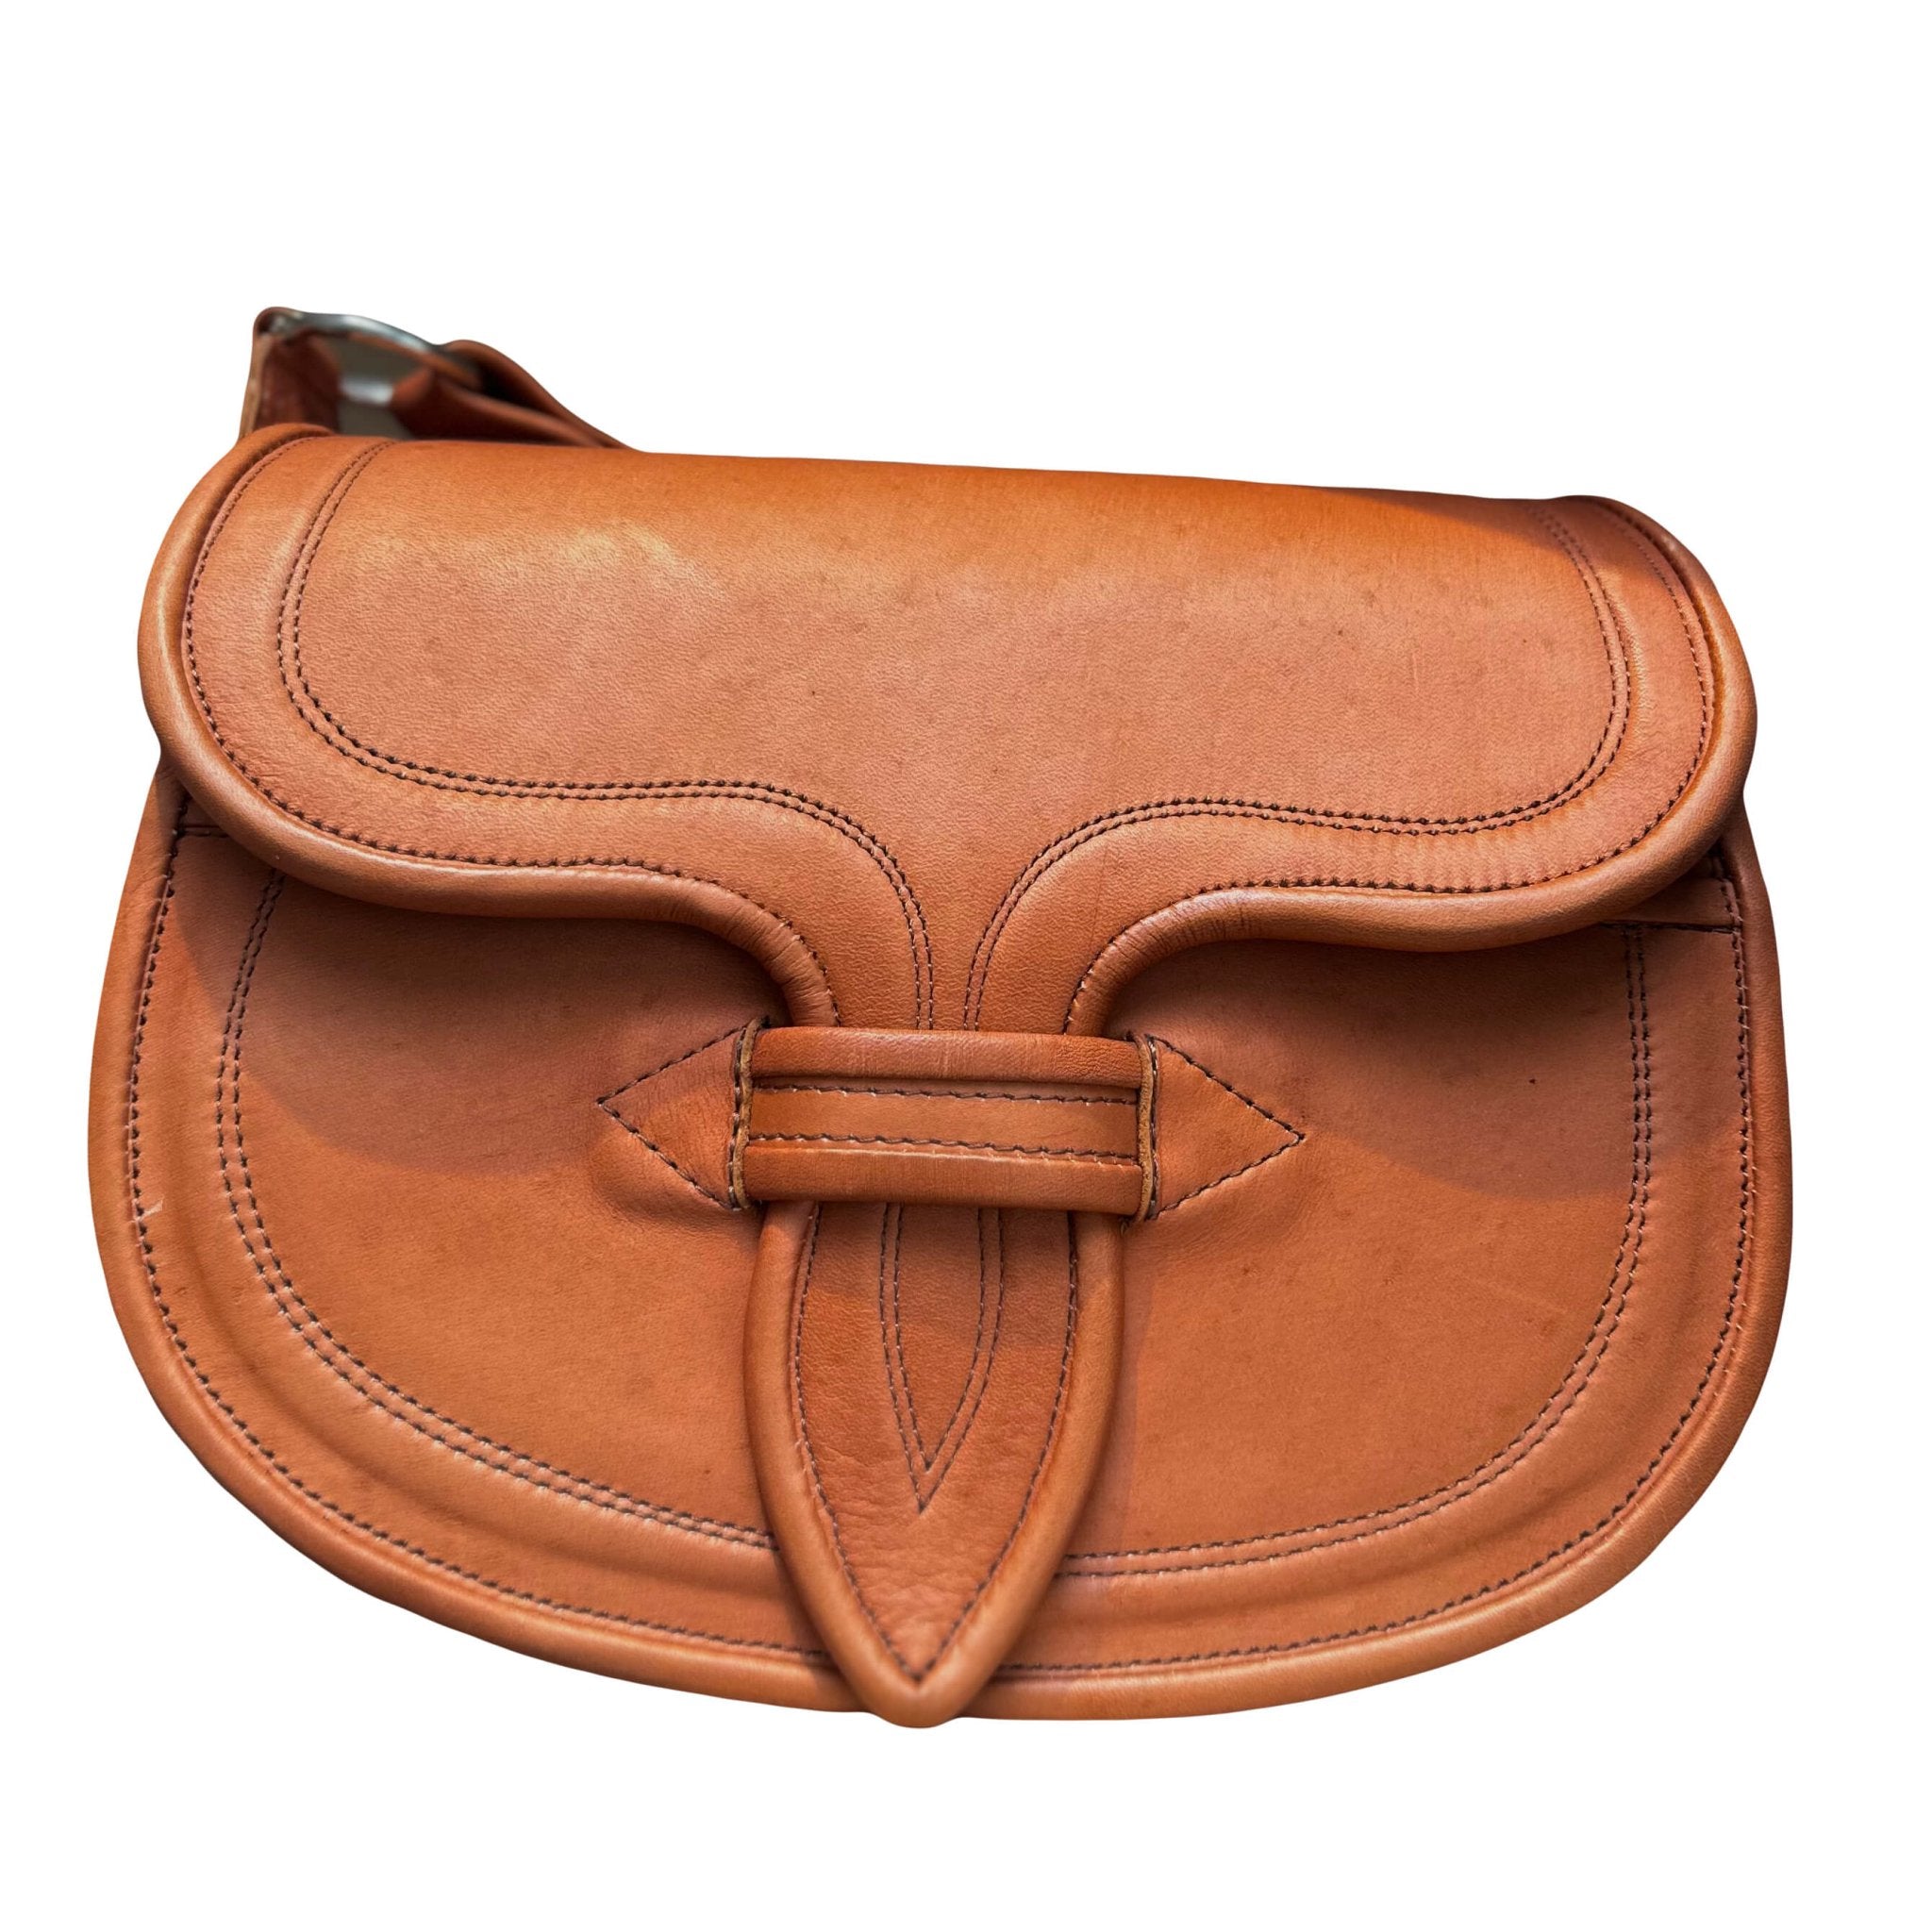 Oversized carriel crossbody bag in camel. It is a semi round bag with intricate stitching. It is displayed over a white background.